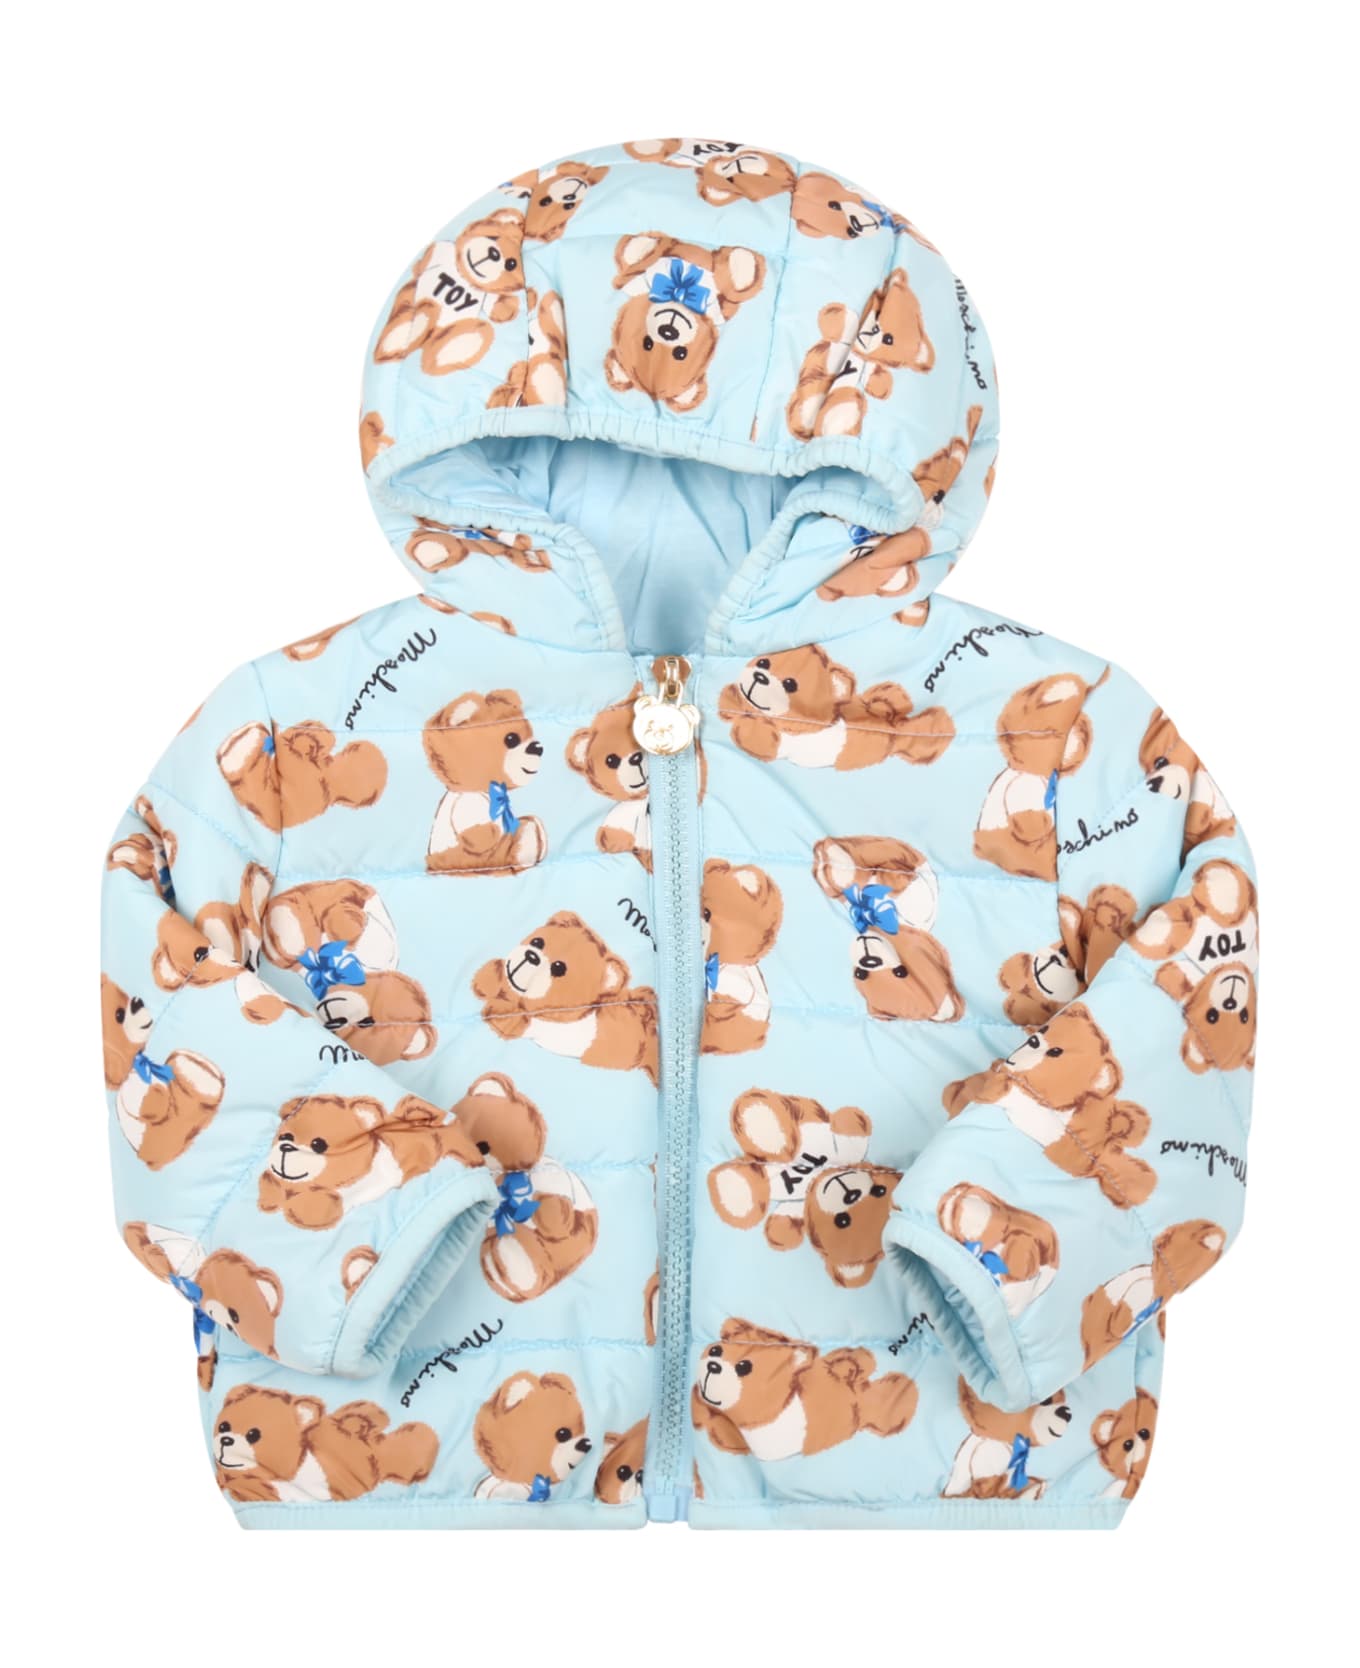 Moschino Light Blue Jacket For Baby Boy With Teddy Bears - Light Blue